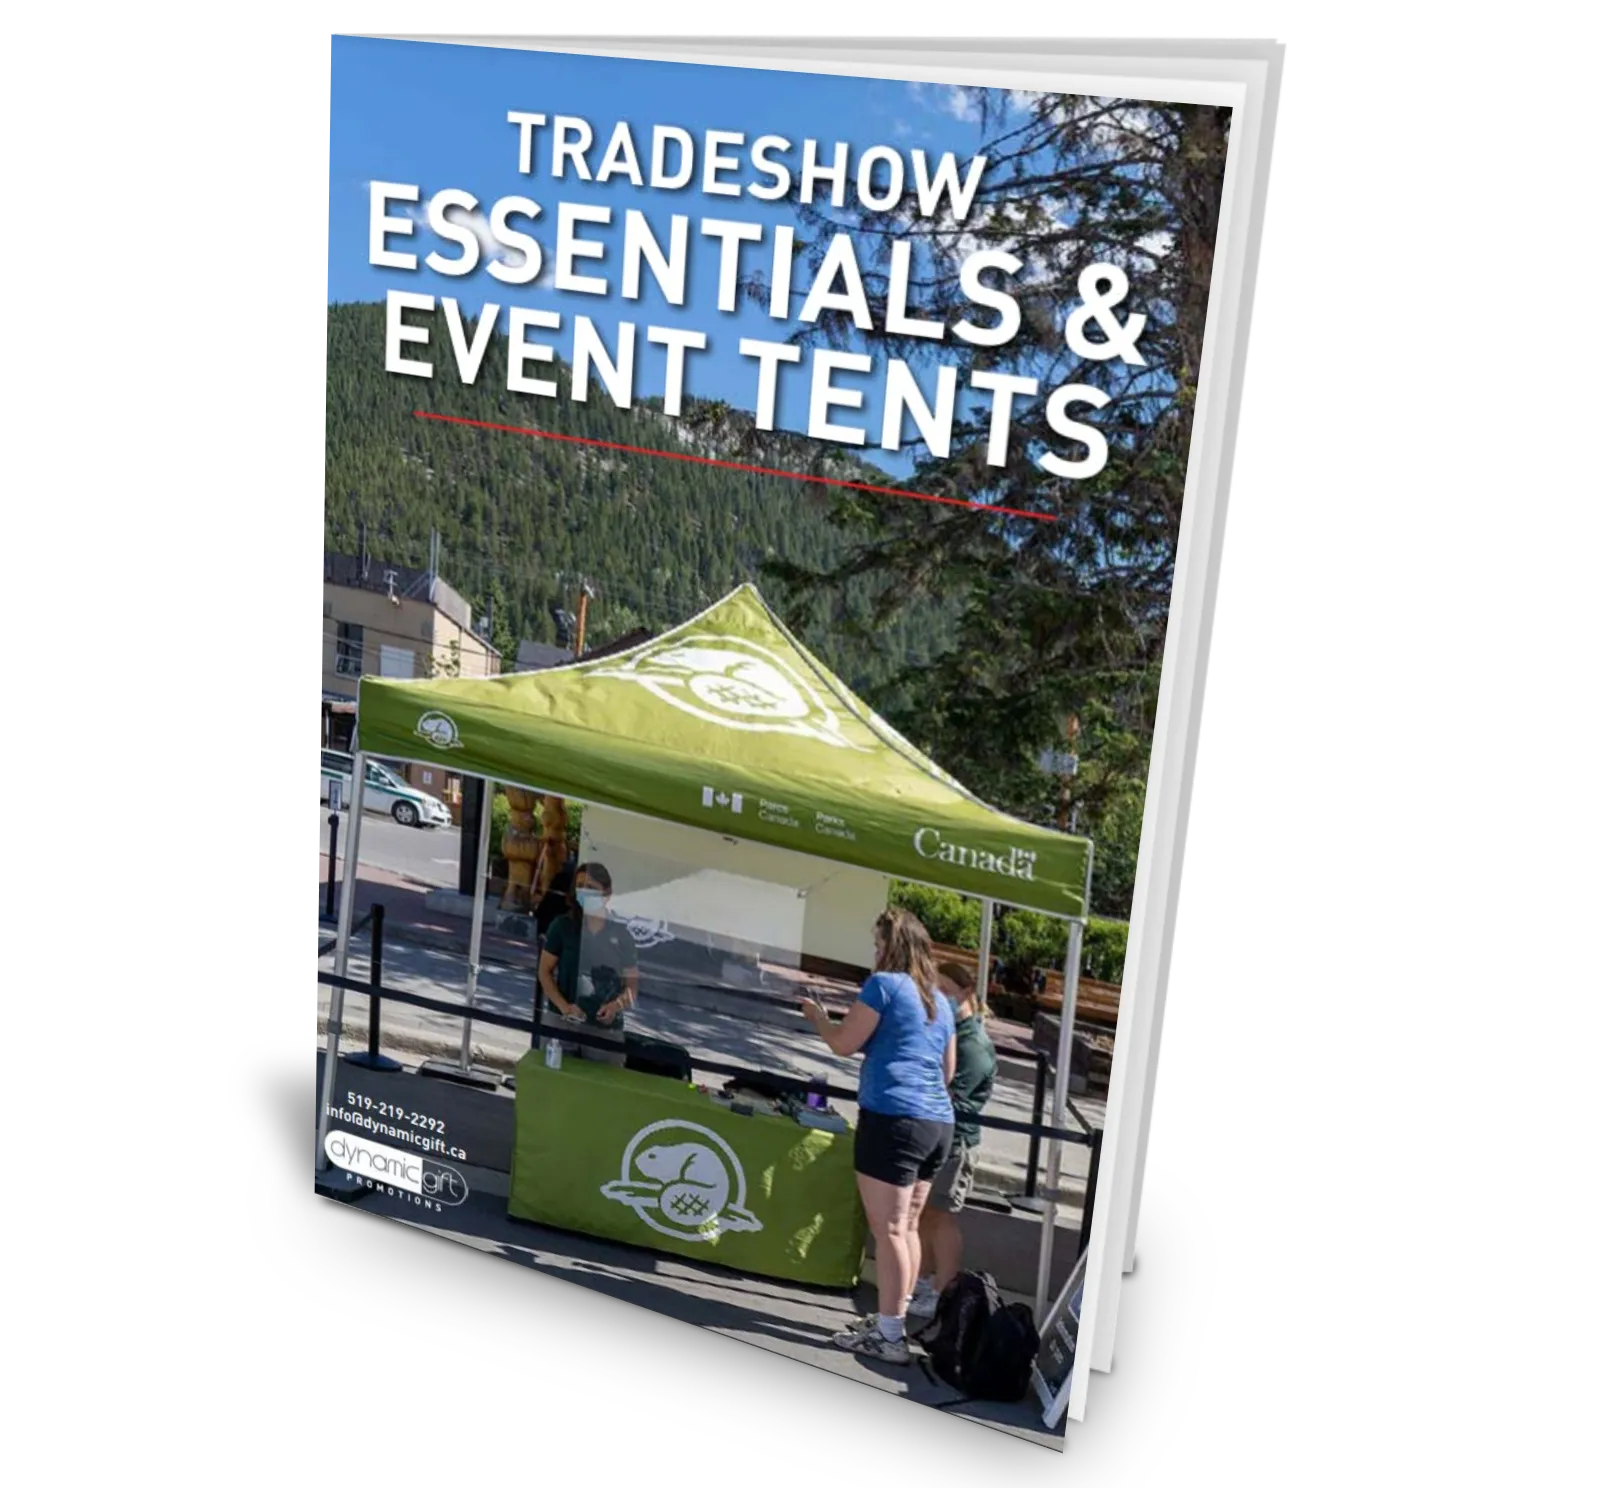 Tradeshow Essentials catalogue by Dynamic Gift